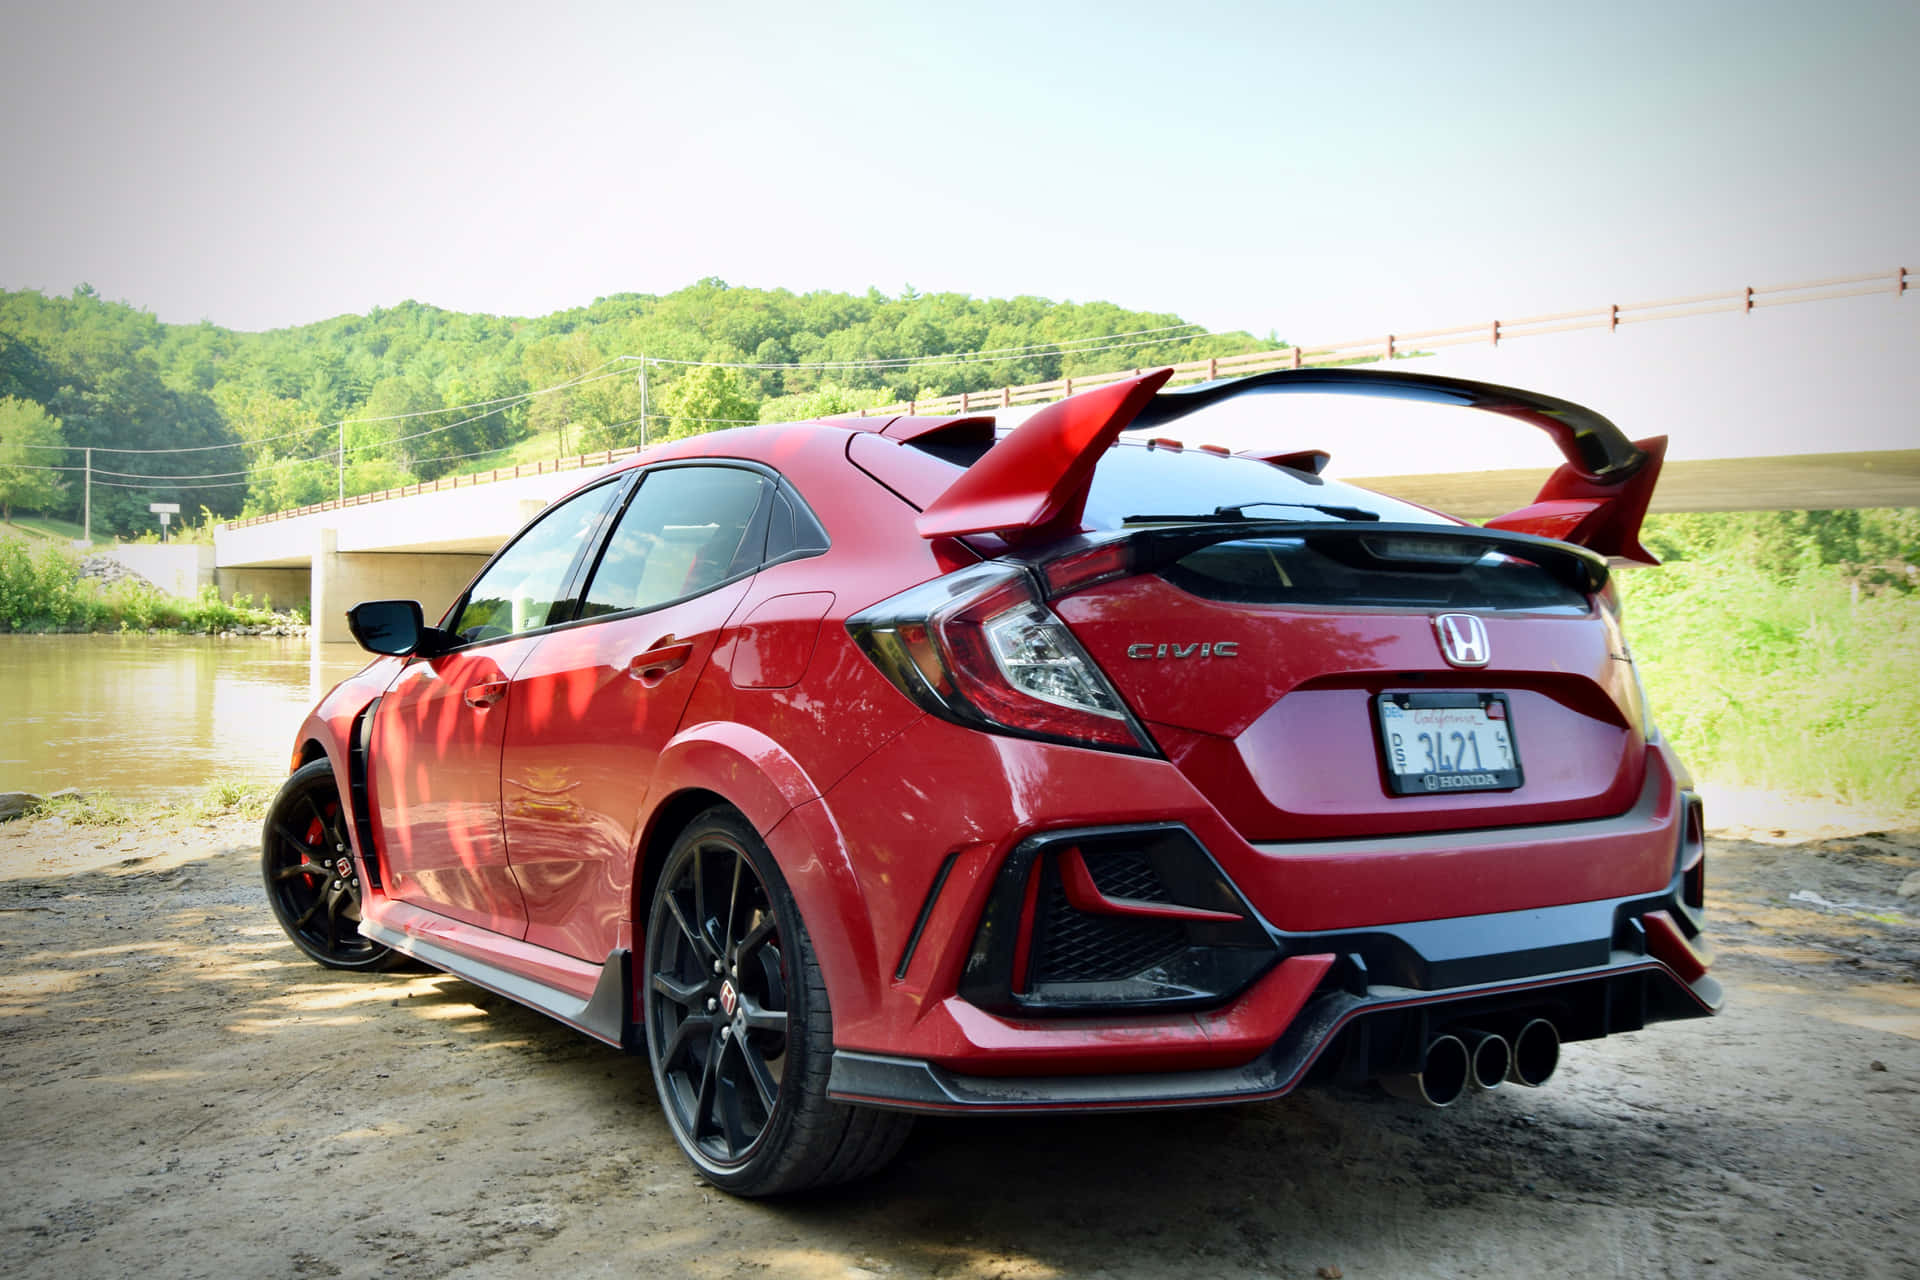 A must-have for speed and style - The Honda Civic Type R Wallpaper